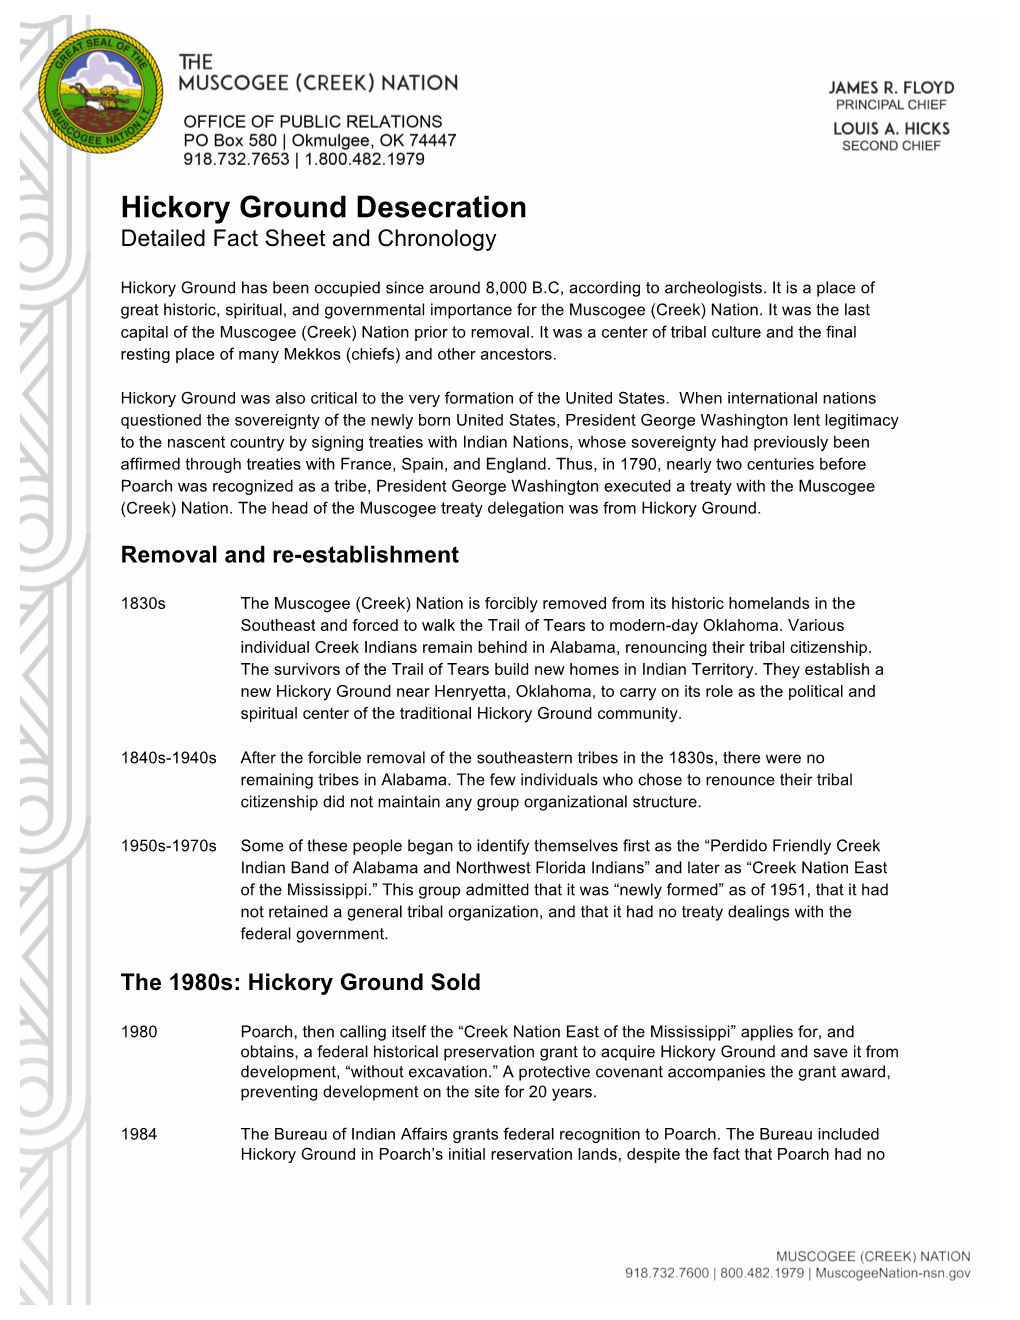 Hickory Ground Desecration Detailed Fact Sheet and Chronology